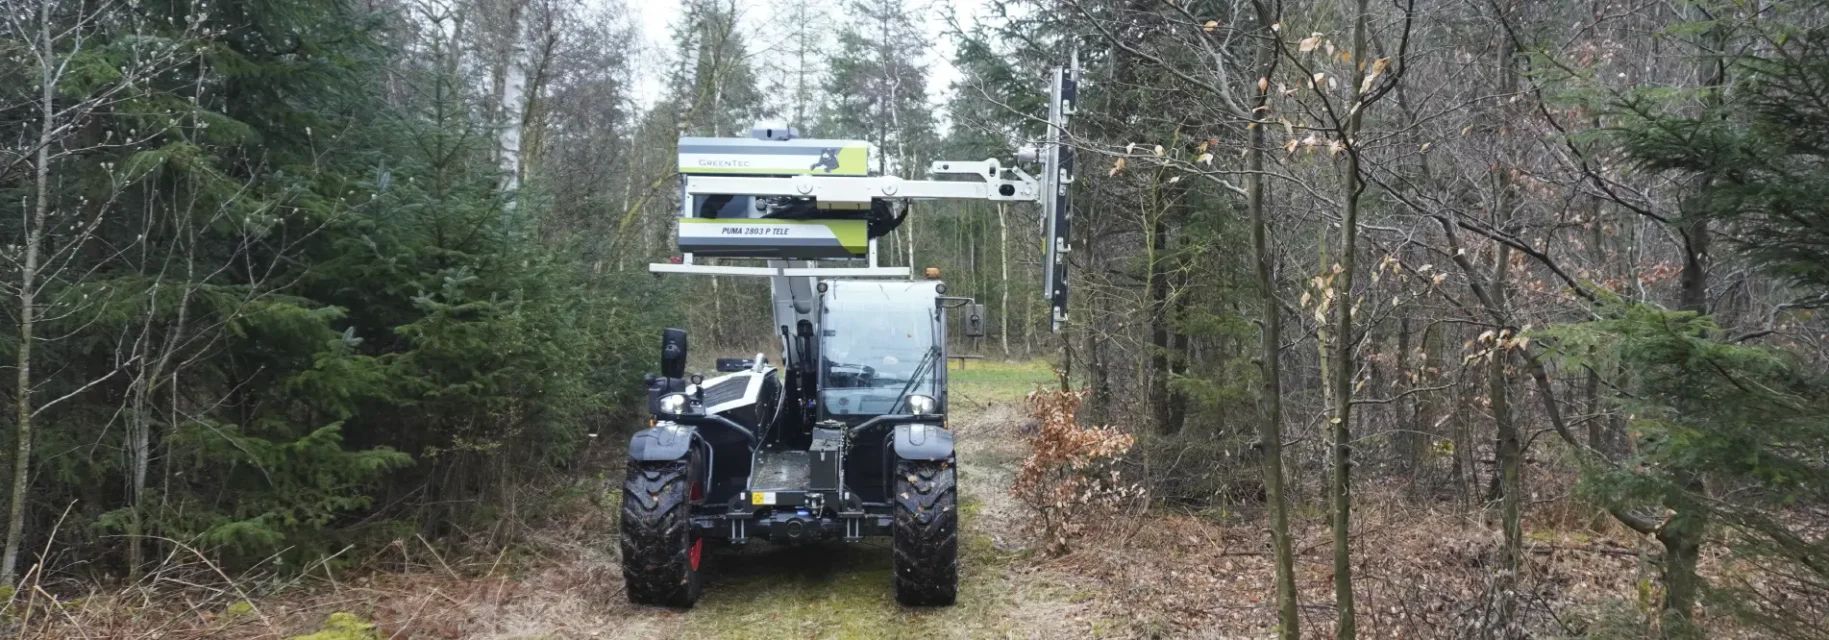 Professional tree trimming with telehandler